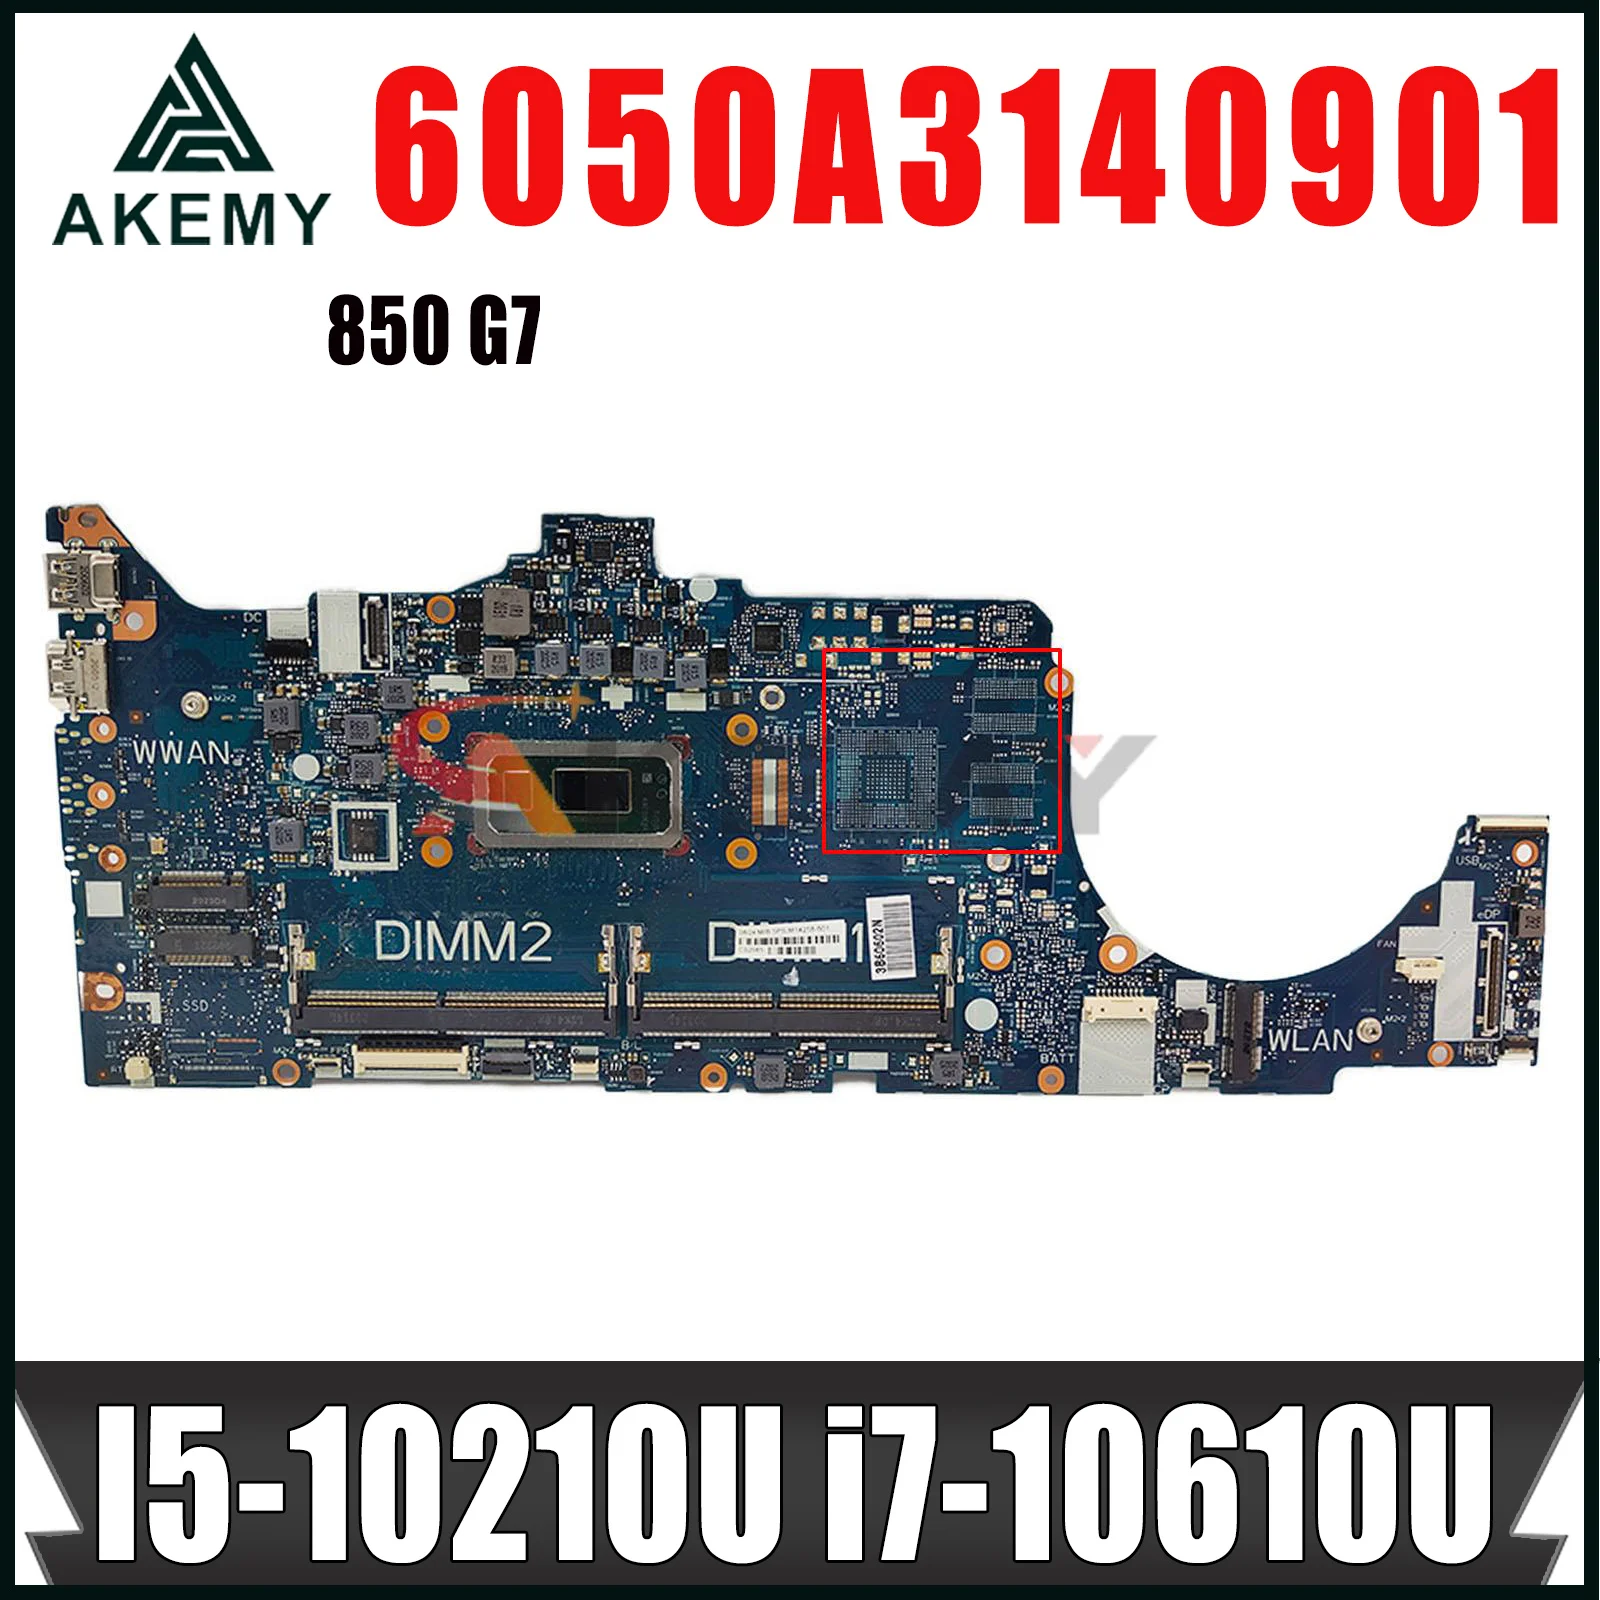 

For Hp ZFirefly15 850 G7 Laptop Motherboard With I5-10210U I7-10610U CPU 6050A3140901 M05246-601 M05246-001 DDR4 100% Tested OK